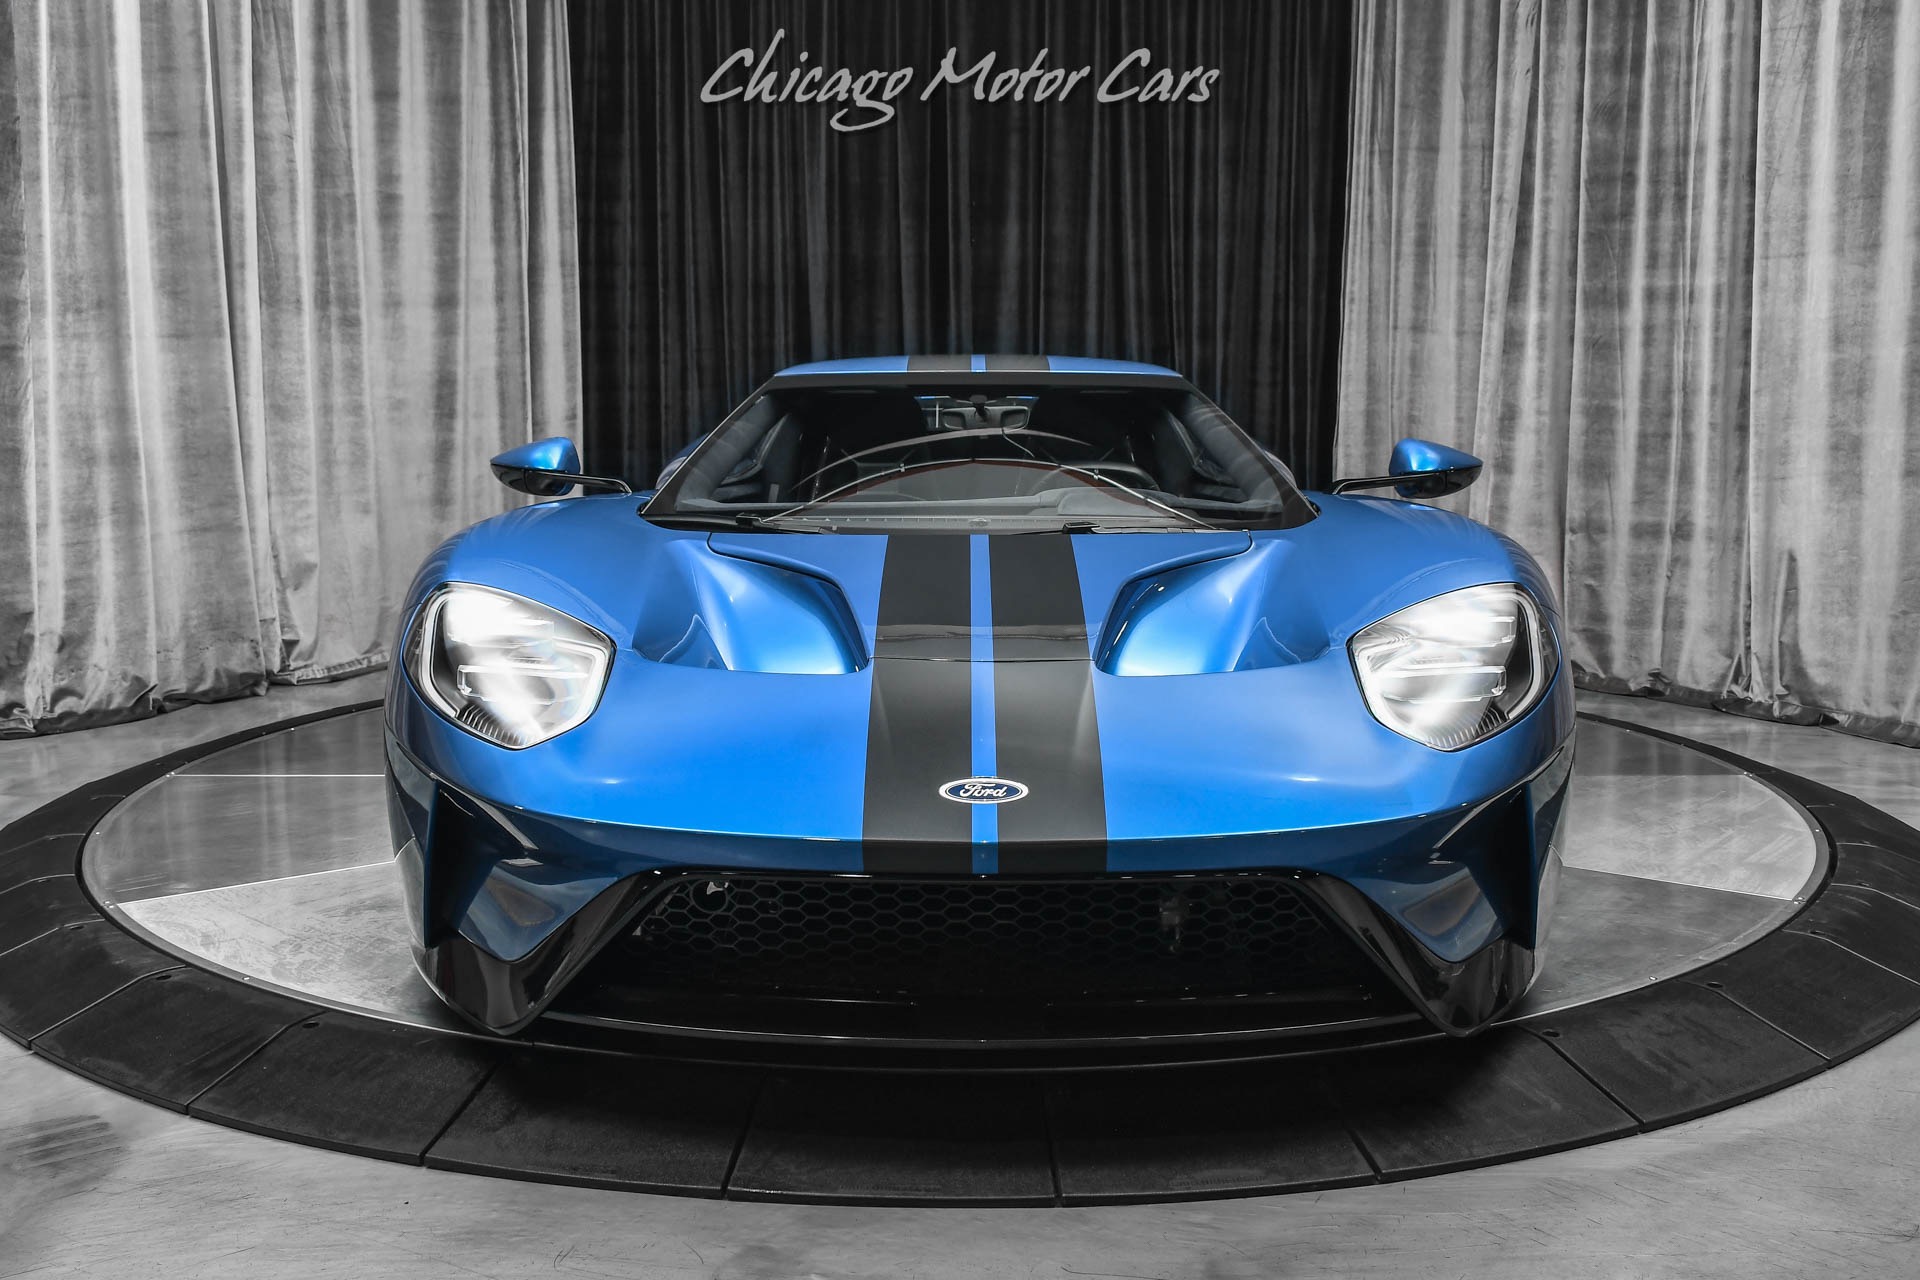 Used-2019-Ford-GT-Coupe-ONLY-1K-Miles-Liquid-Blue-Overtop-Stripes-FULL-PPF-LOADED